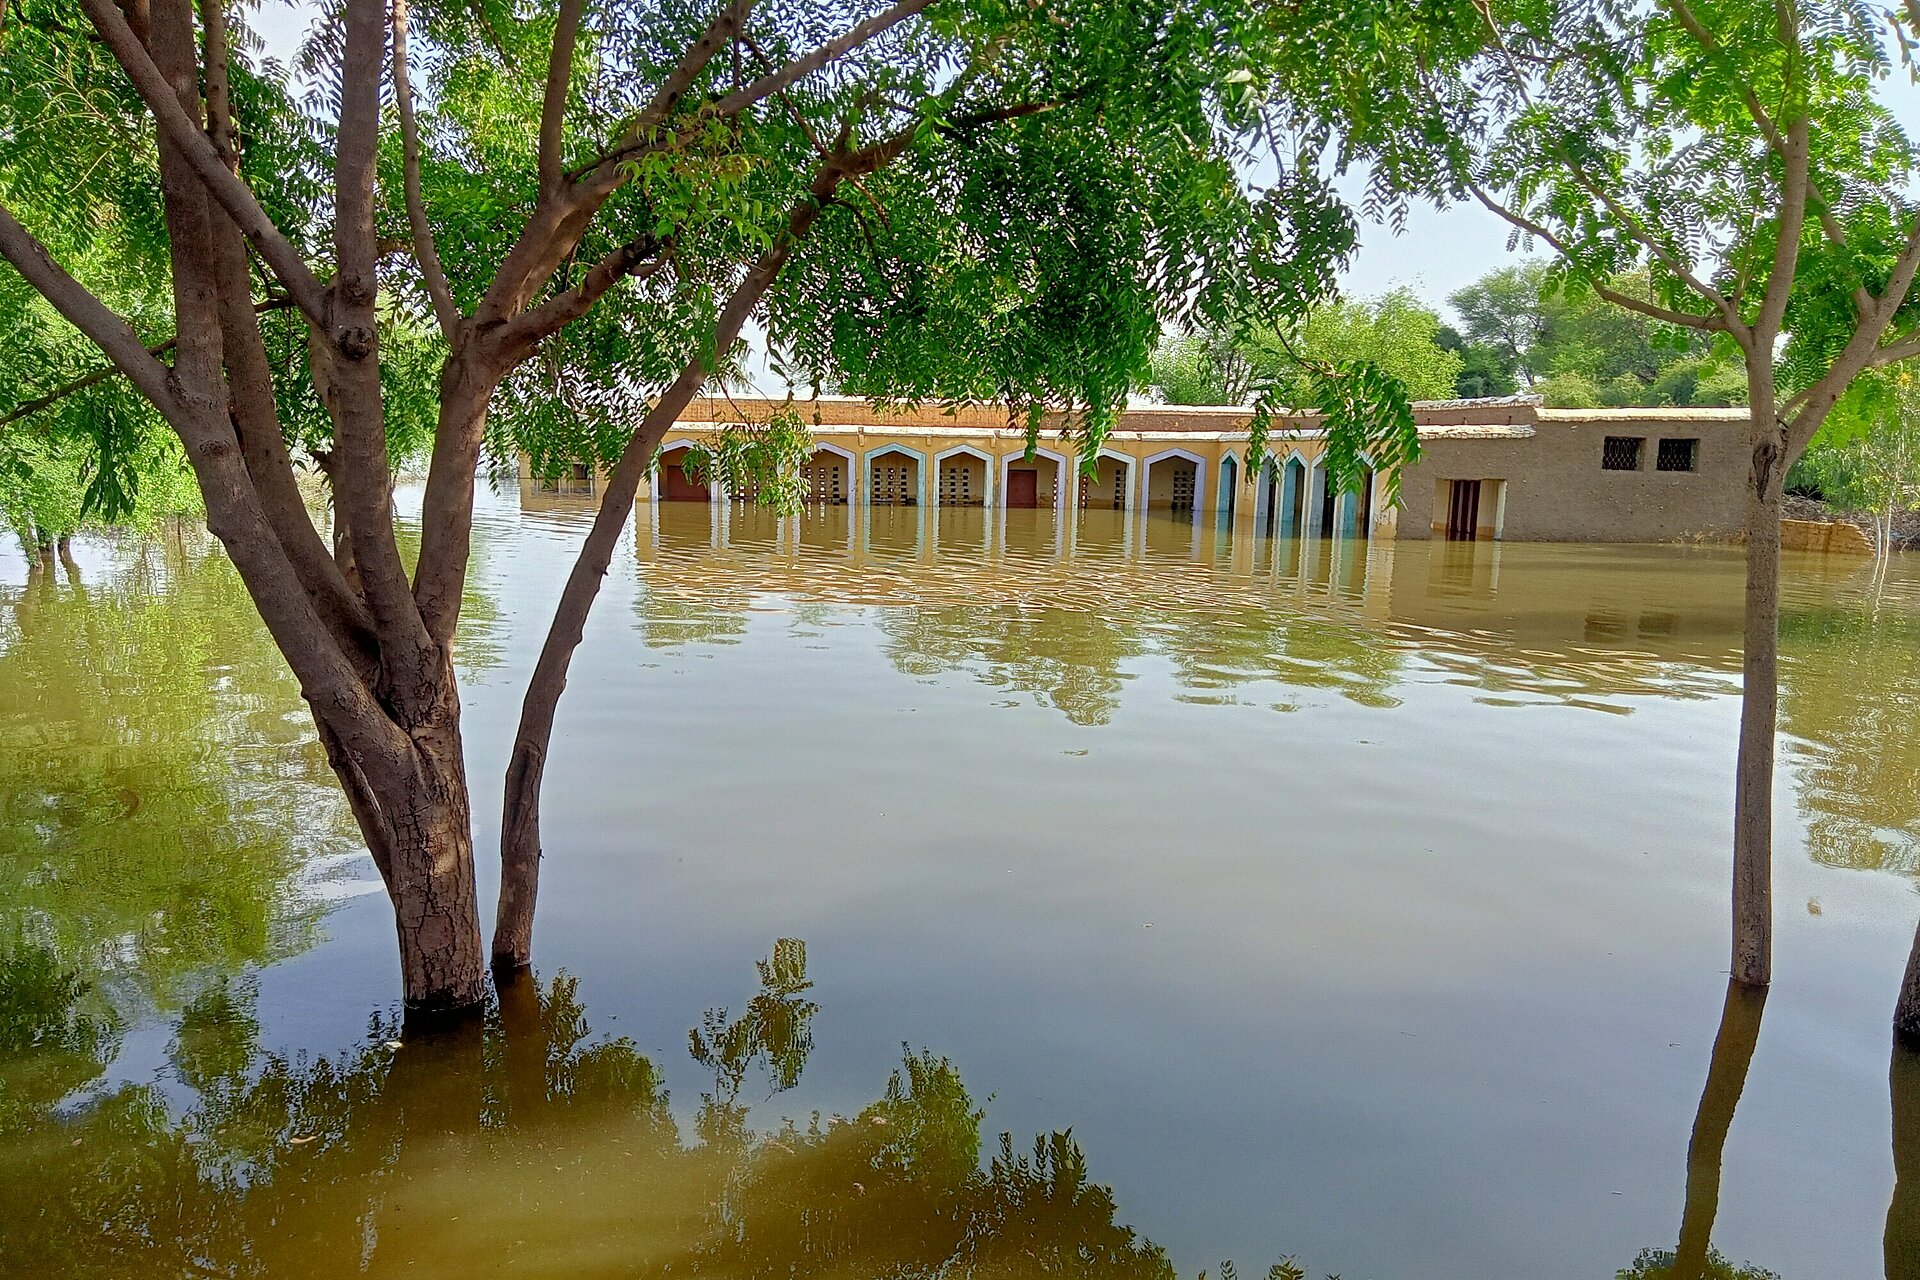 Pakistan’s devastating floods are a call for climate action